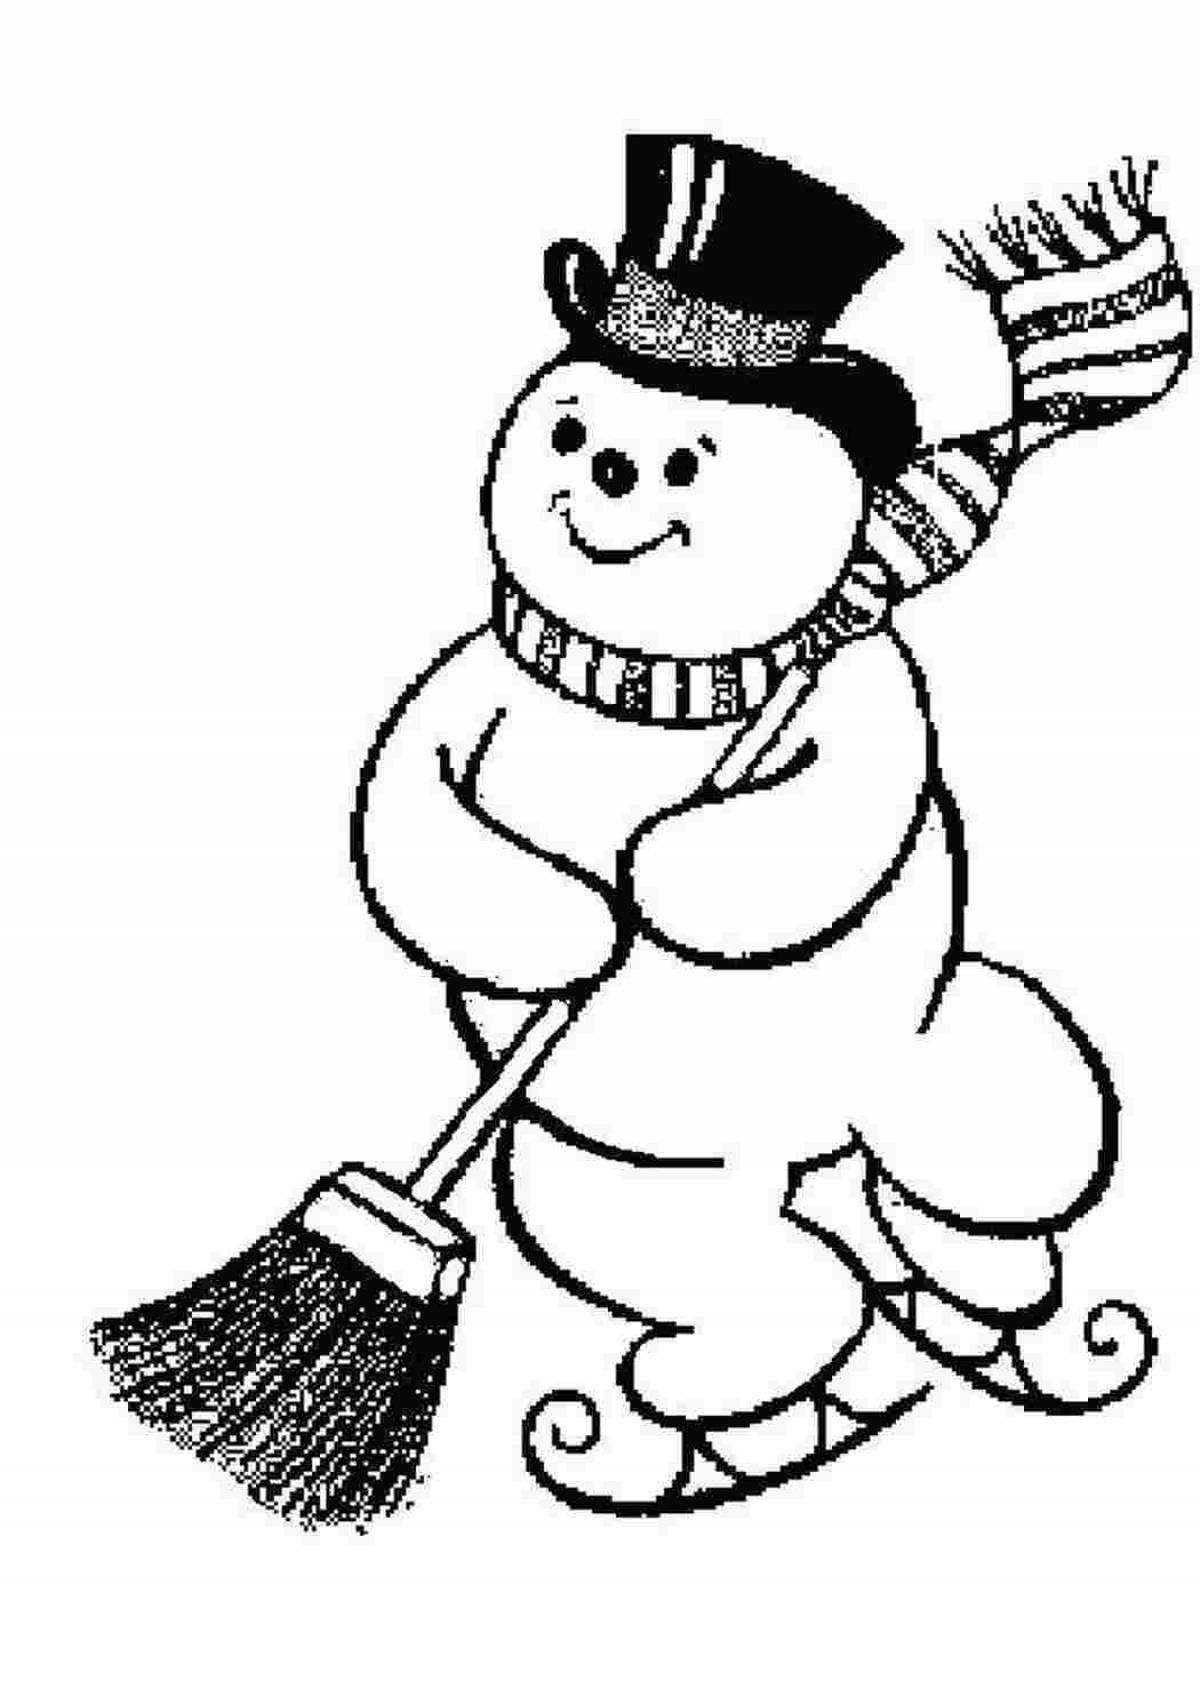 Stylish coloring of a snowman with a broom